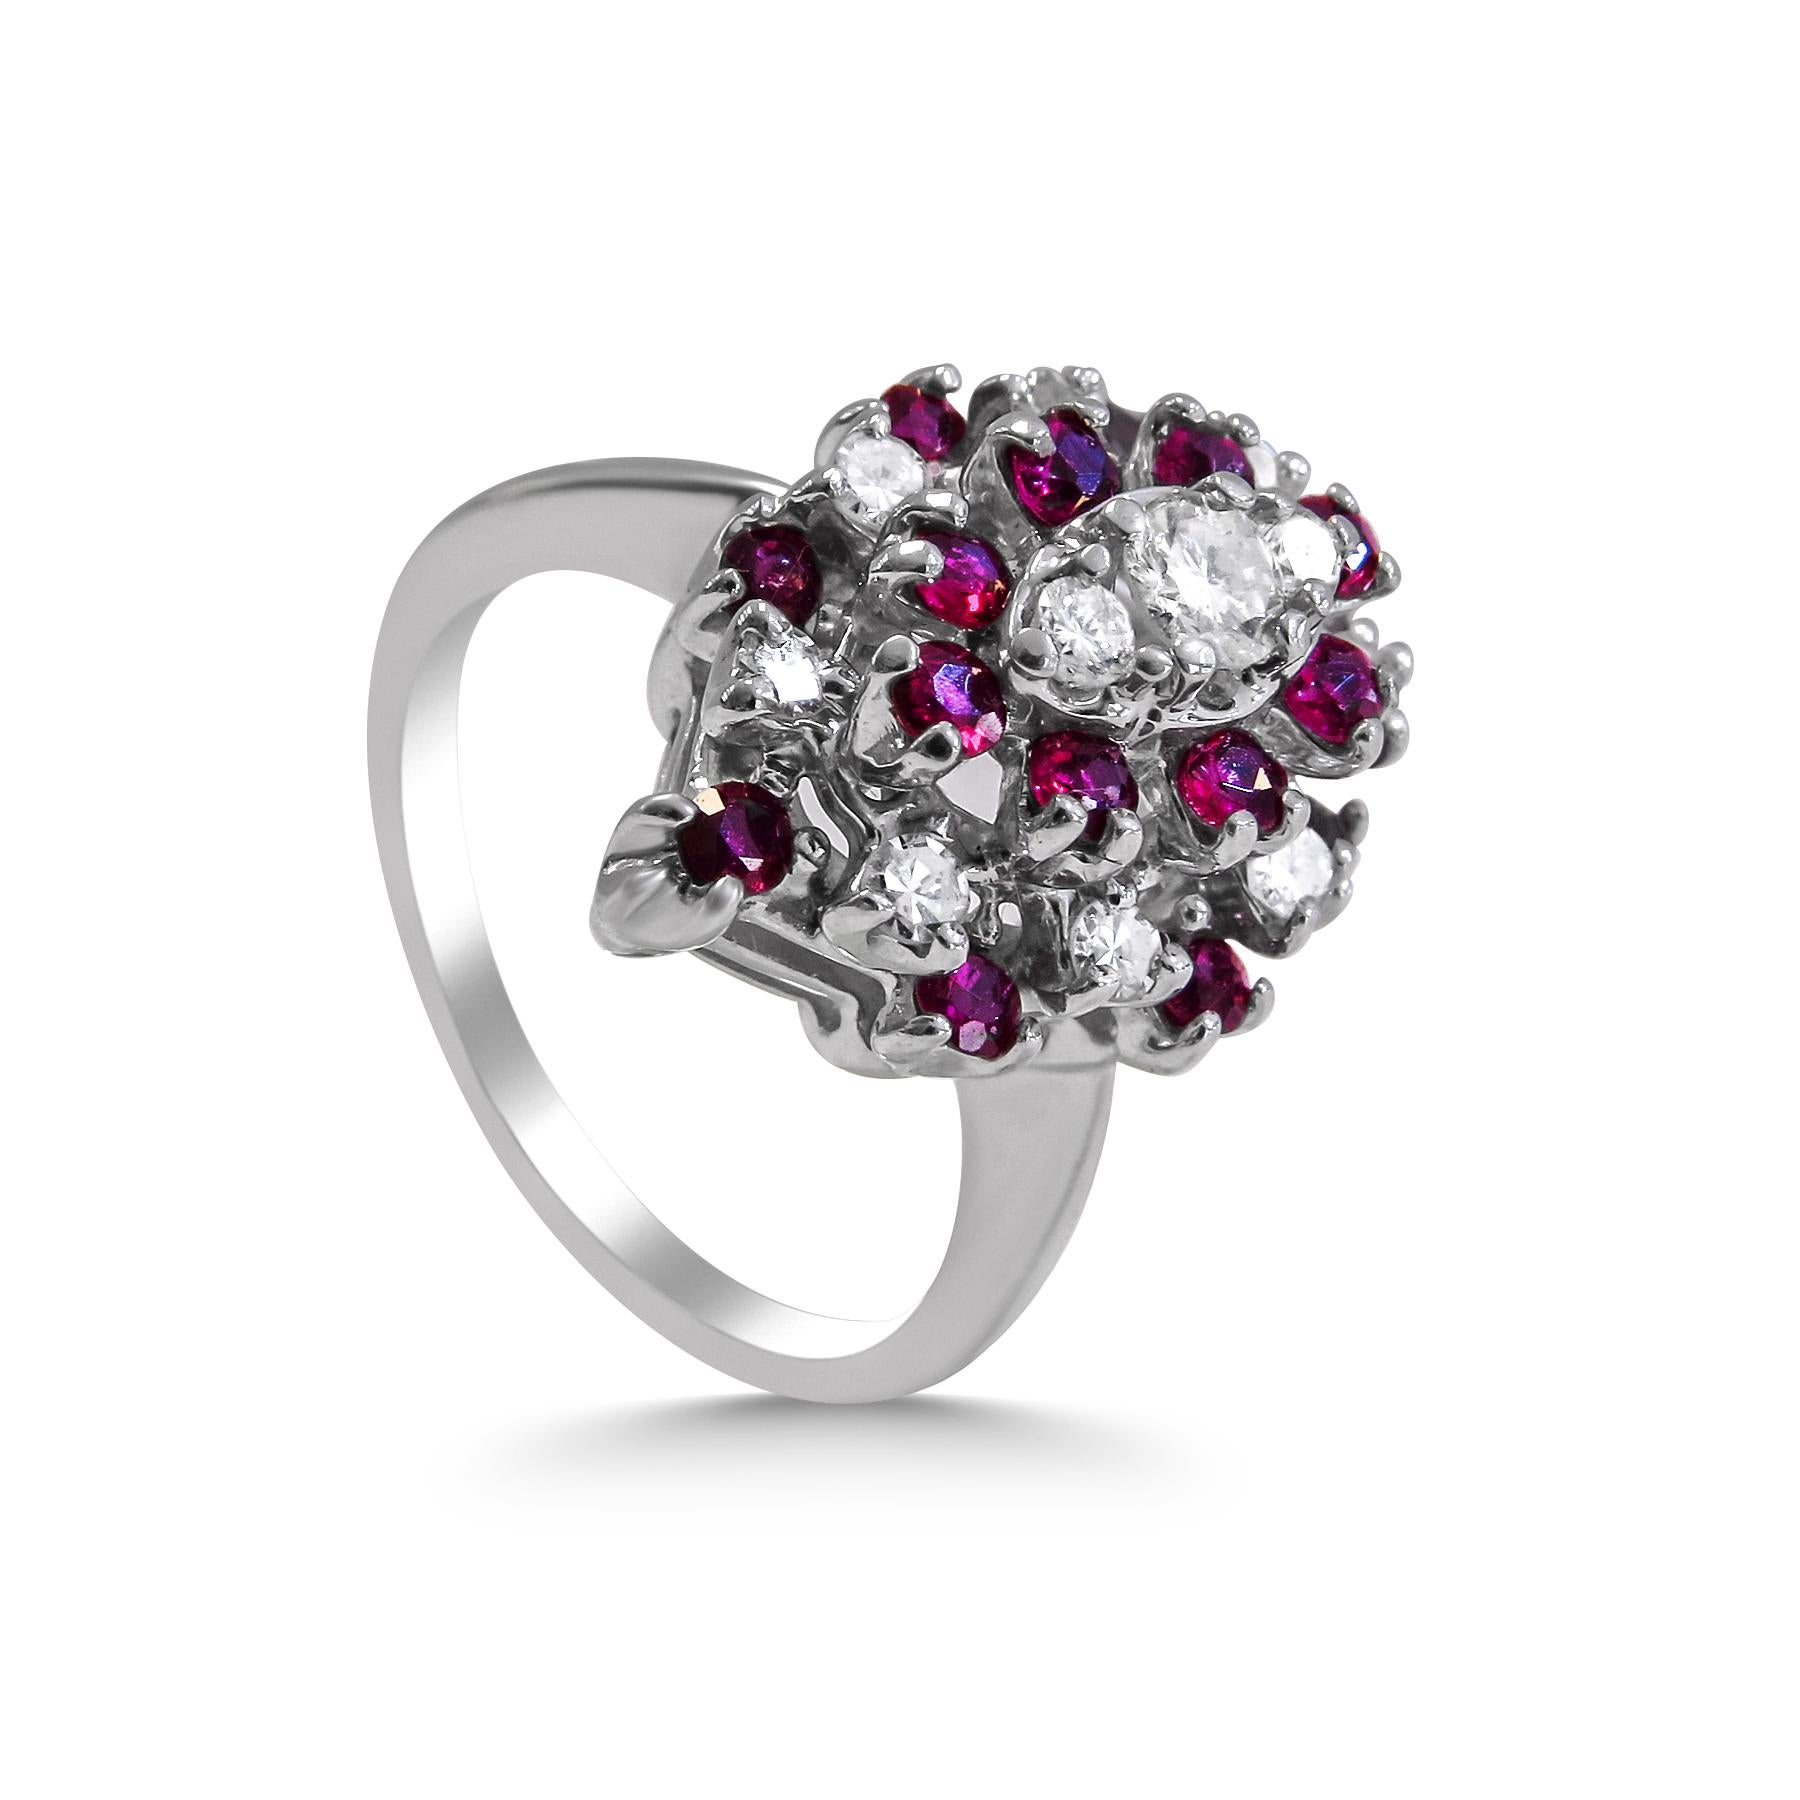 14k White gold
Weight= 5.6gr 
Size= 5 1/2 (We offer complementary  resizing upon request ) 
Diamond= 0.35 ct total 
Ruby= 0.25 ct  total